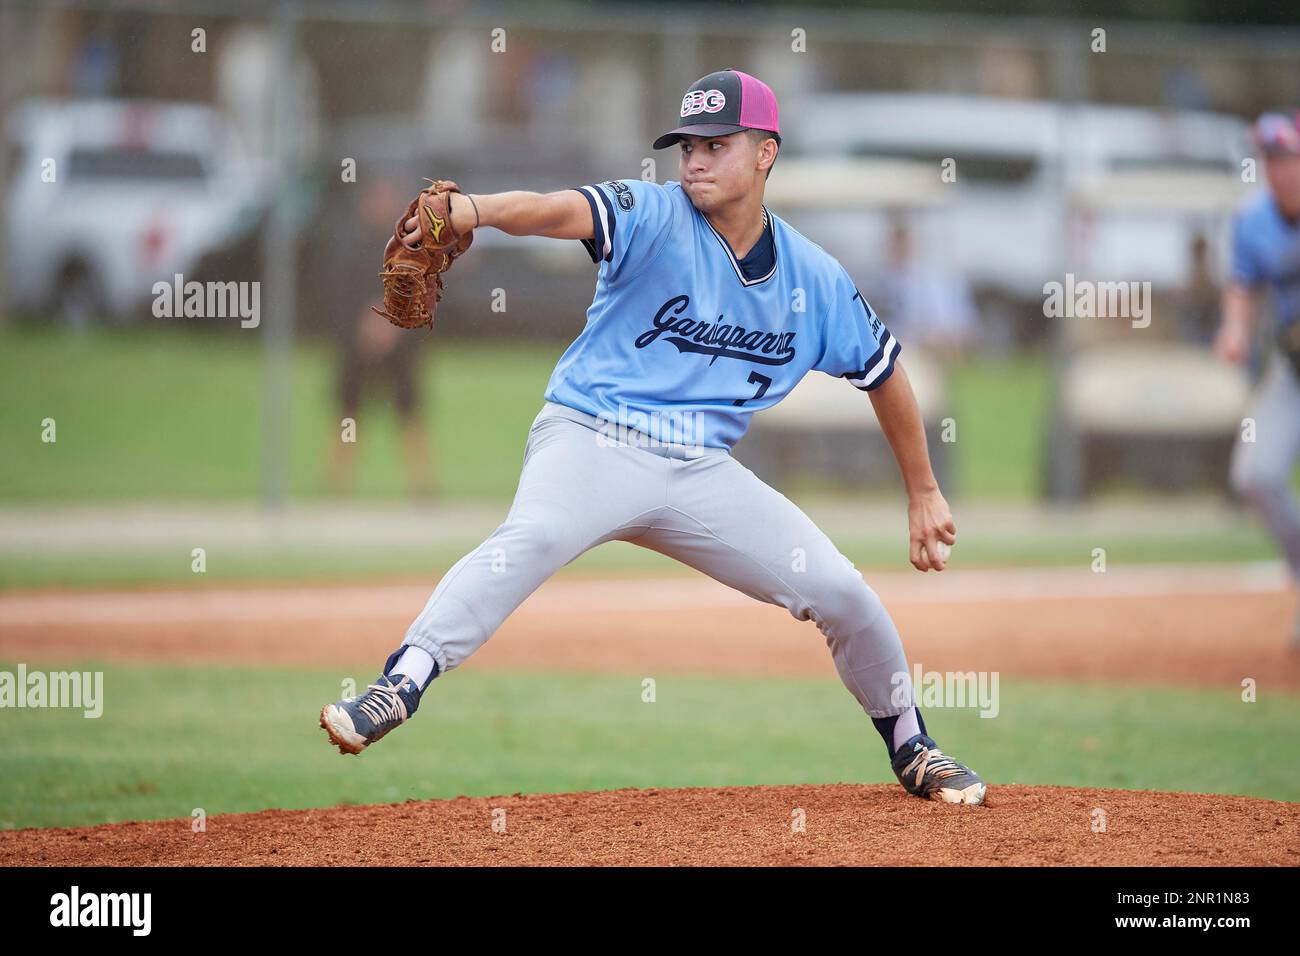 Connor Skertich (7) during the WWBA World Championship at the Roger Dean Complex on October 12, 2019 in Jupiter, Florida